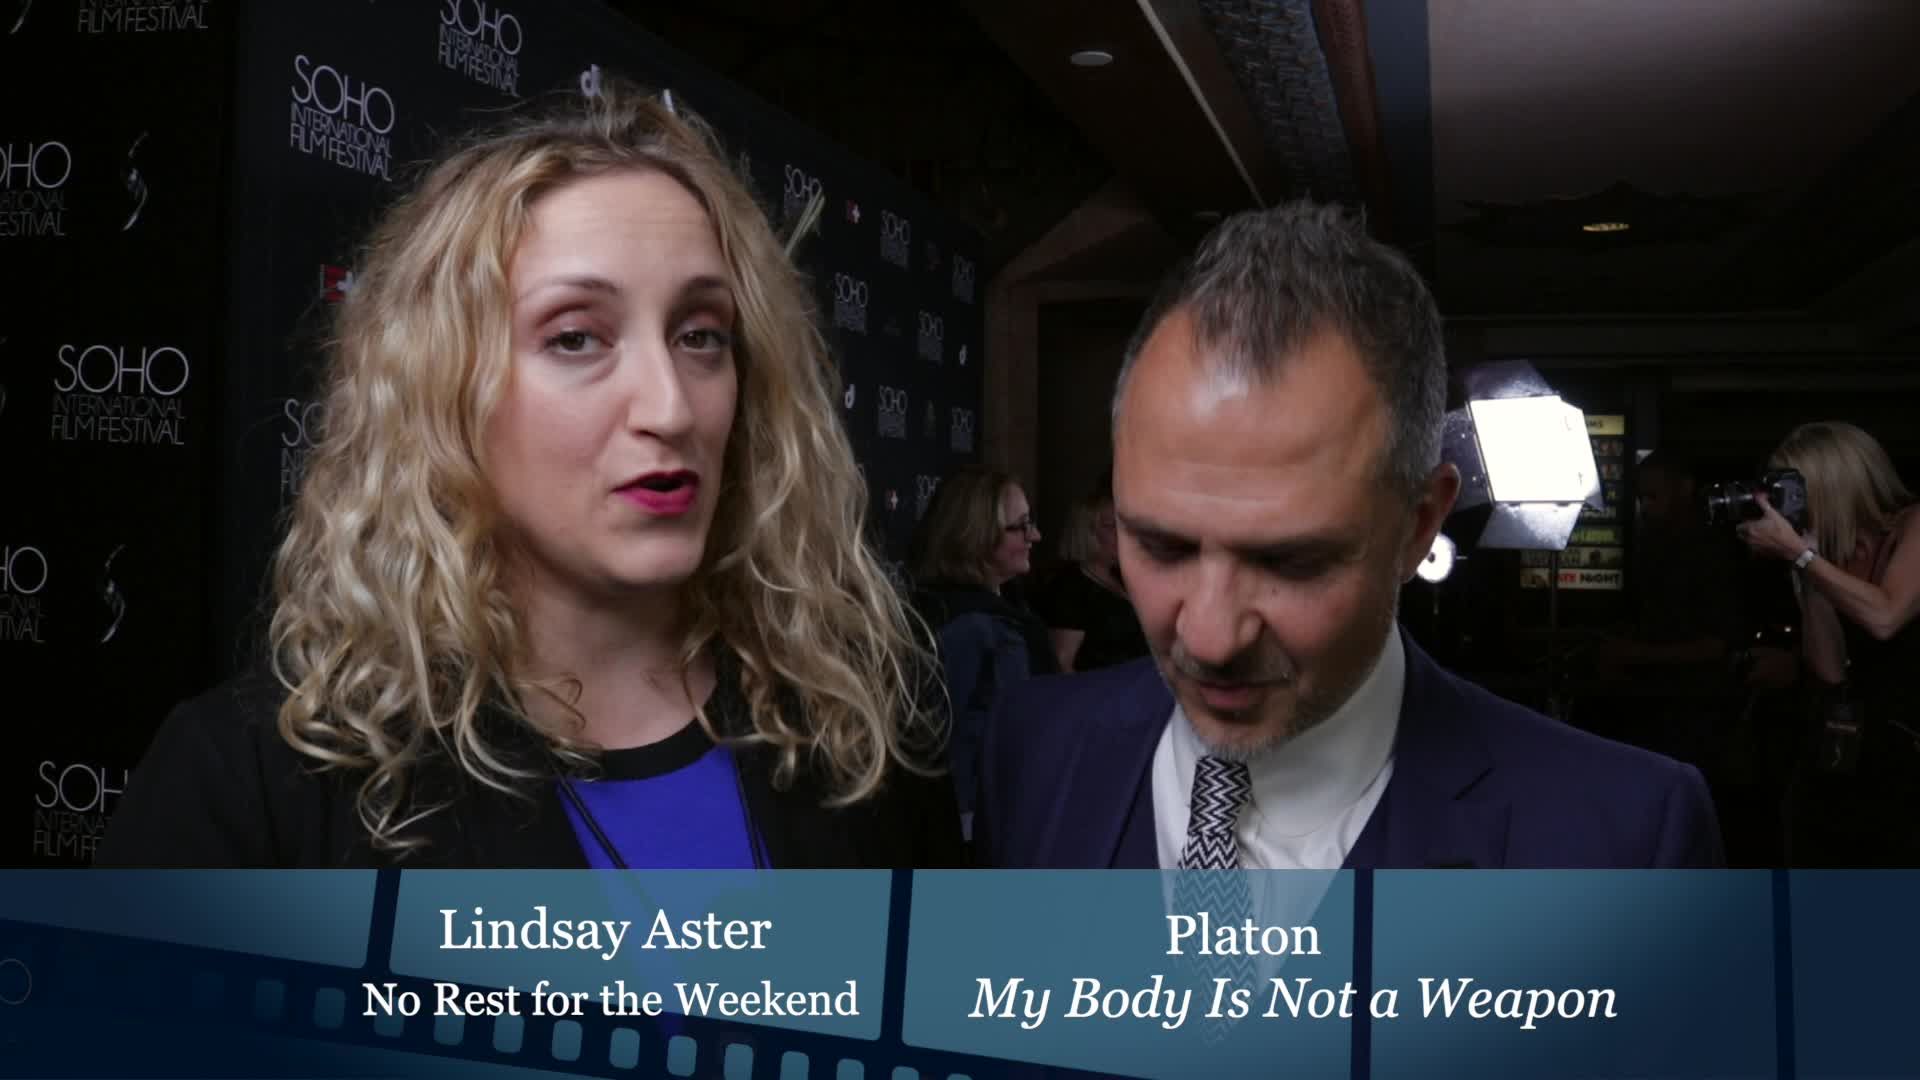 SIFF 2019: My Body Is Not a Weapon